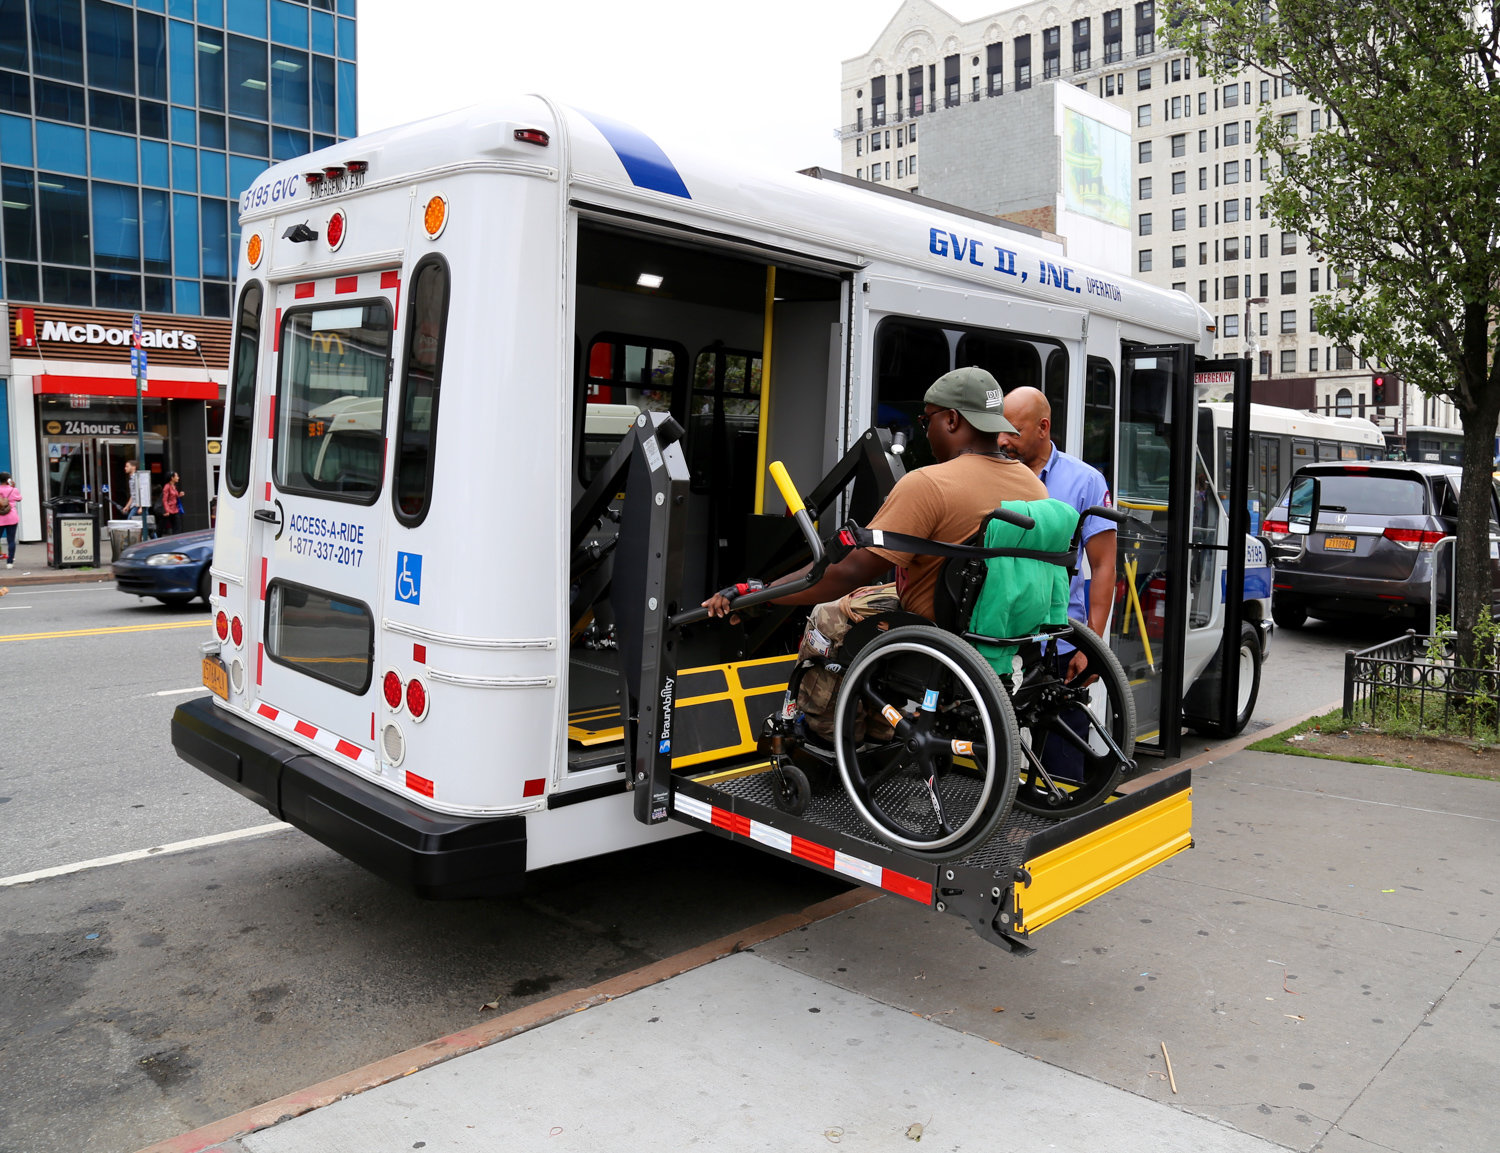 Despite the seeming ubiquity of Access-A-Ride, it can be largely inaccessible to many who need it. Recently proposed changes could make the barrier to entry even higher. The MTA, which oversees the transportation alternative for those who need assistance through the American With Disabilities Act, wants to limit the number of trips and distance of those rides for those using the e-hail version of the service.